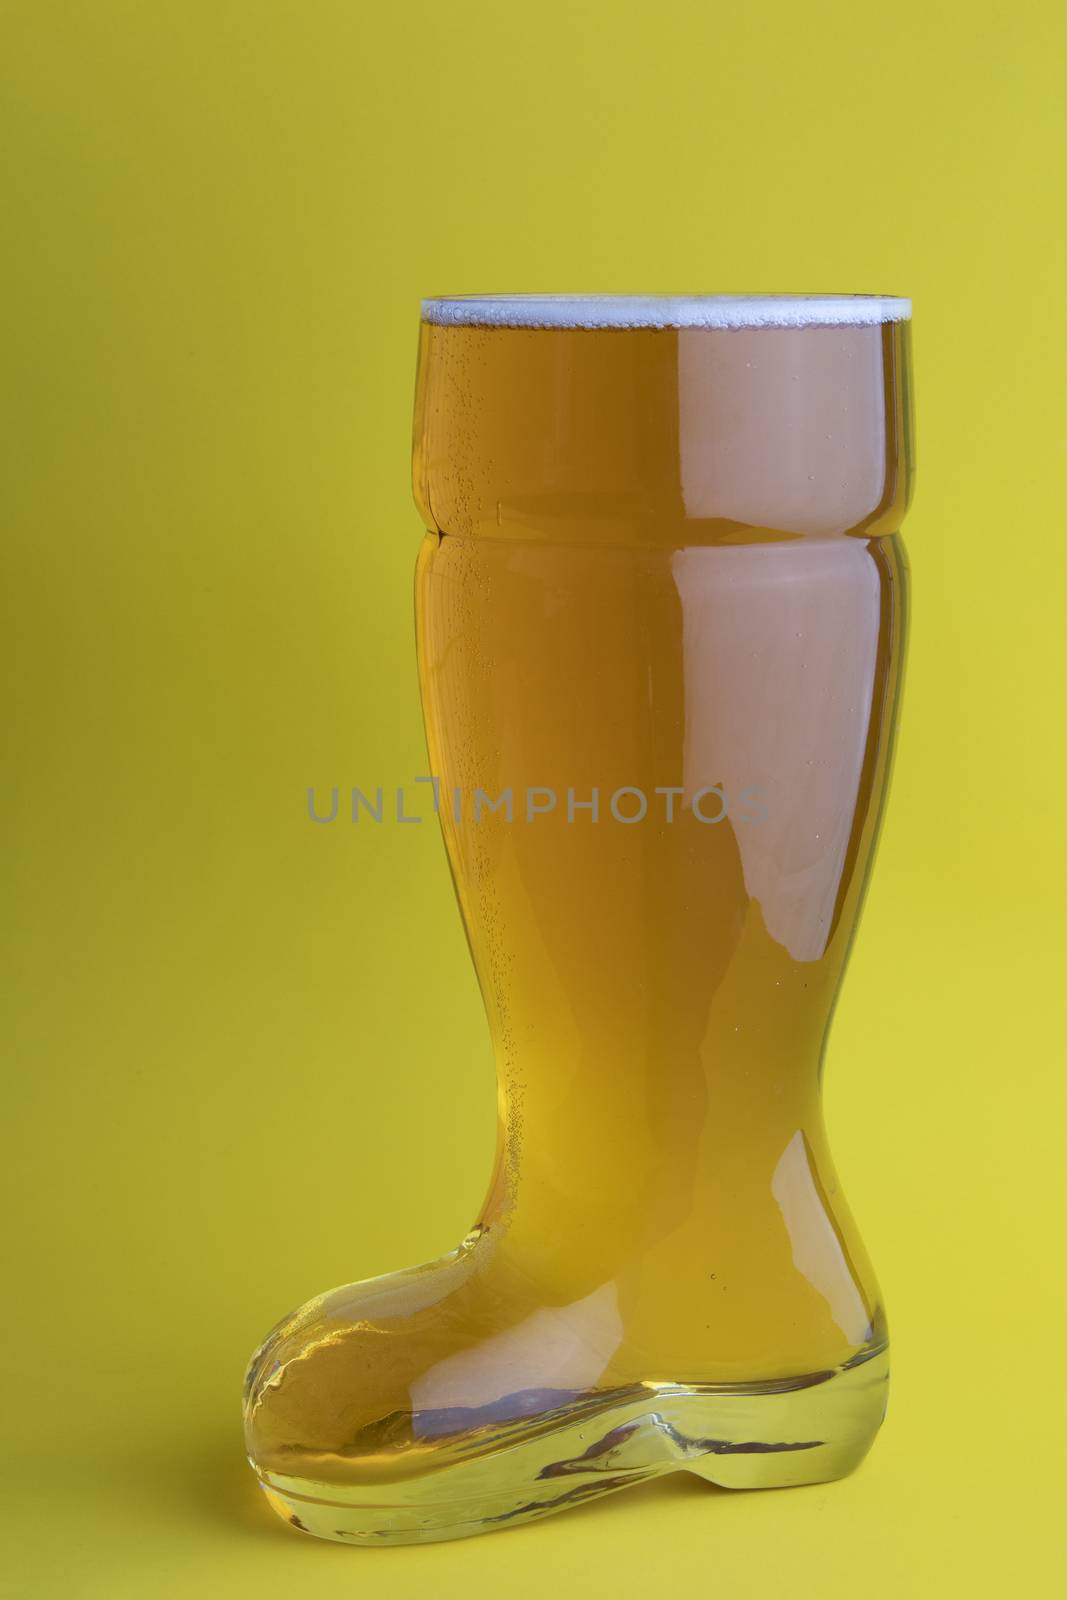 Beer in a boot beer glass in yellow background by oasisamuel